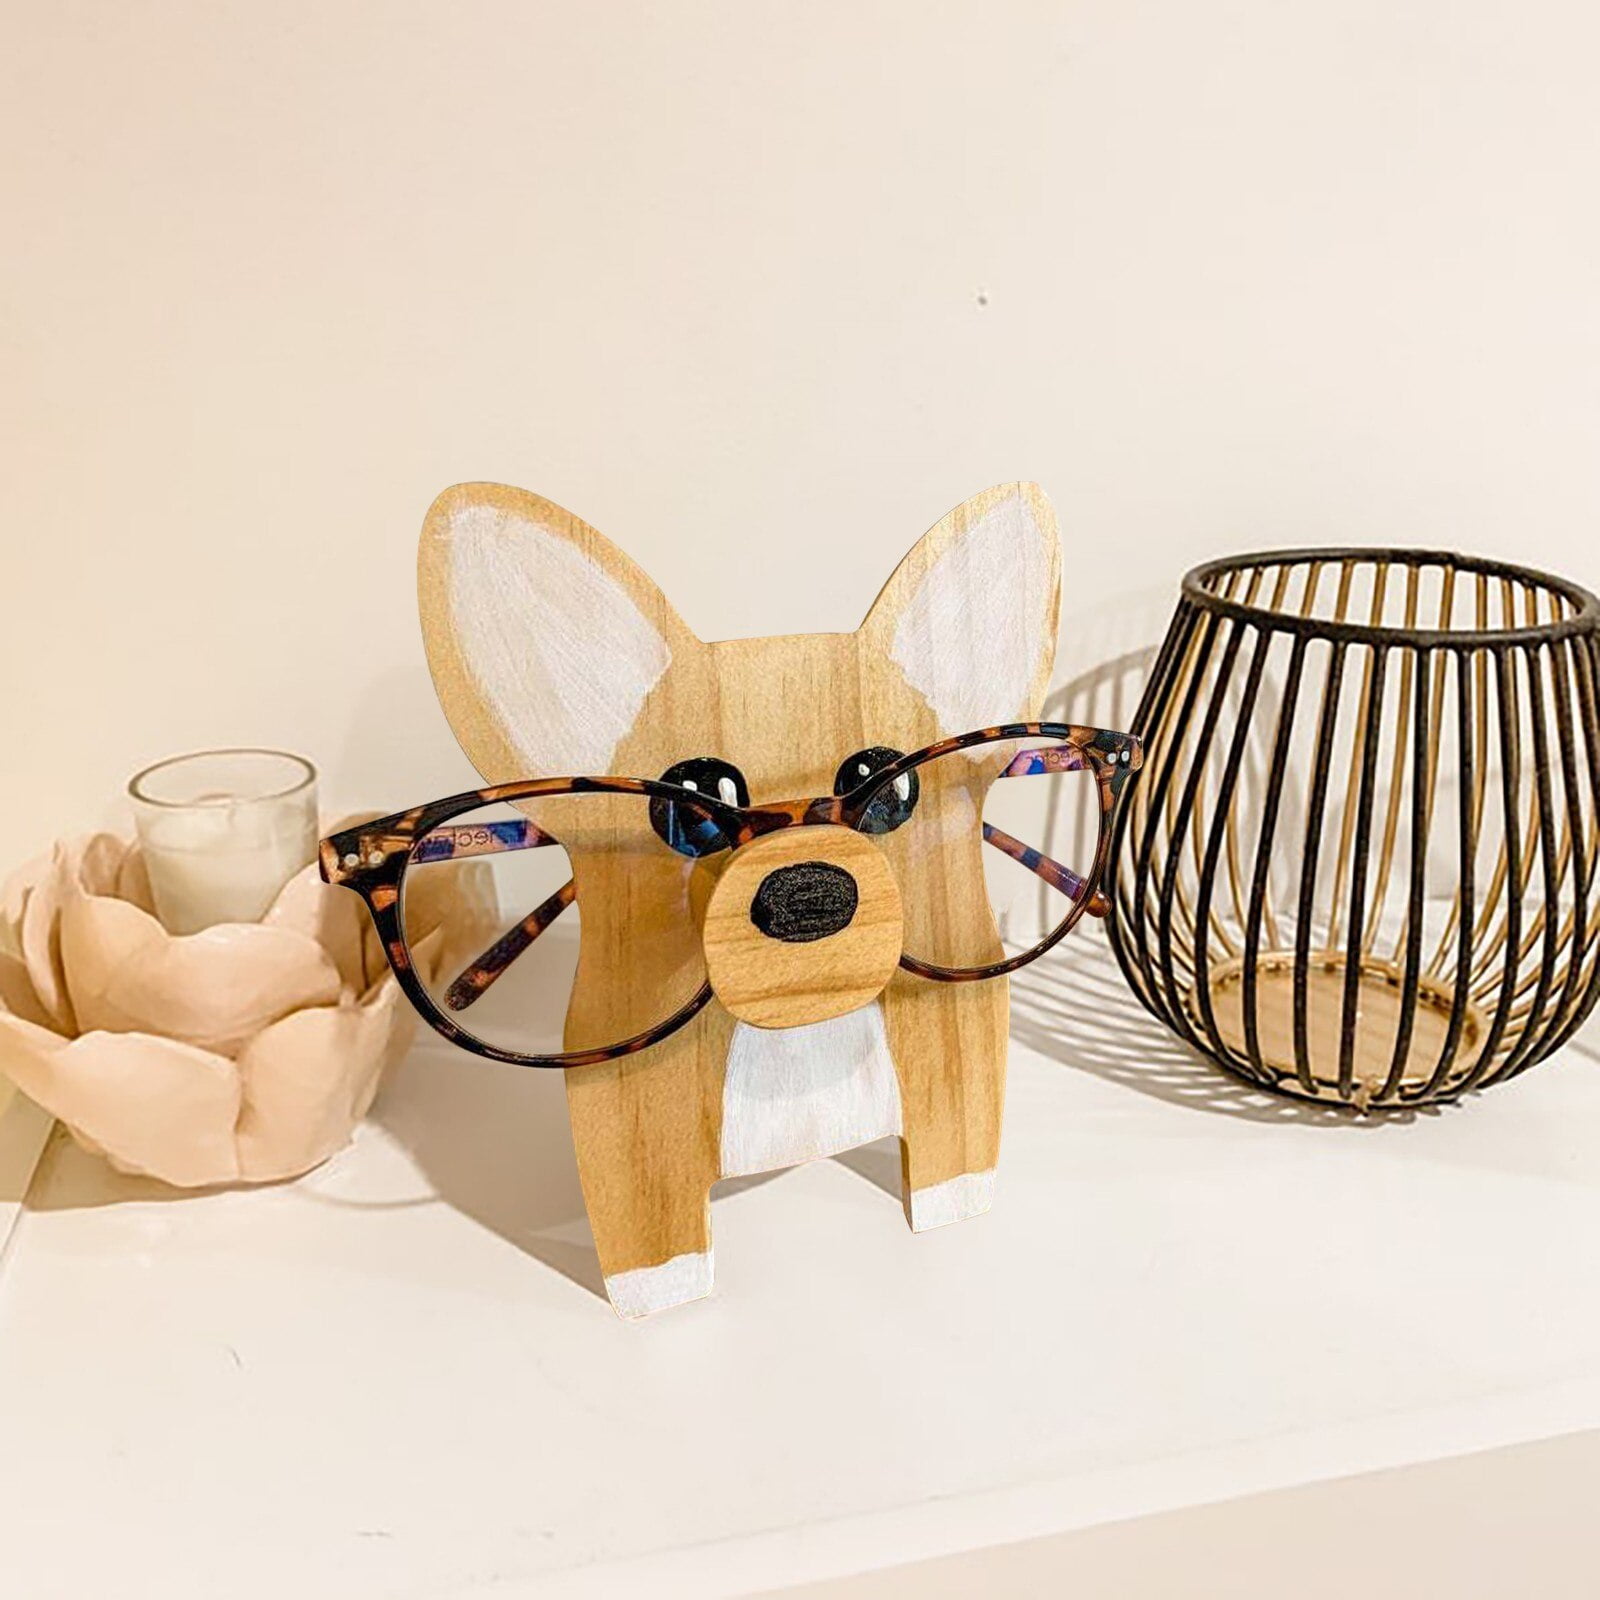 Keweis Creative Glasses Holder Stand, Cute Animal Handmade Wooden Carving  Eyeglass Holder, Sunglasses Spectacle Display Rack for Home, Office, Desk